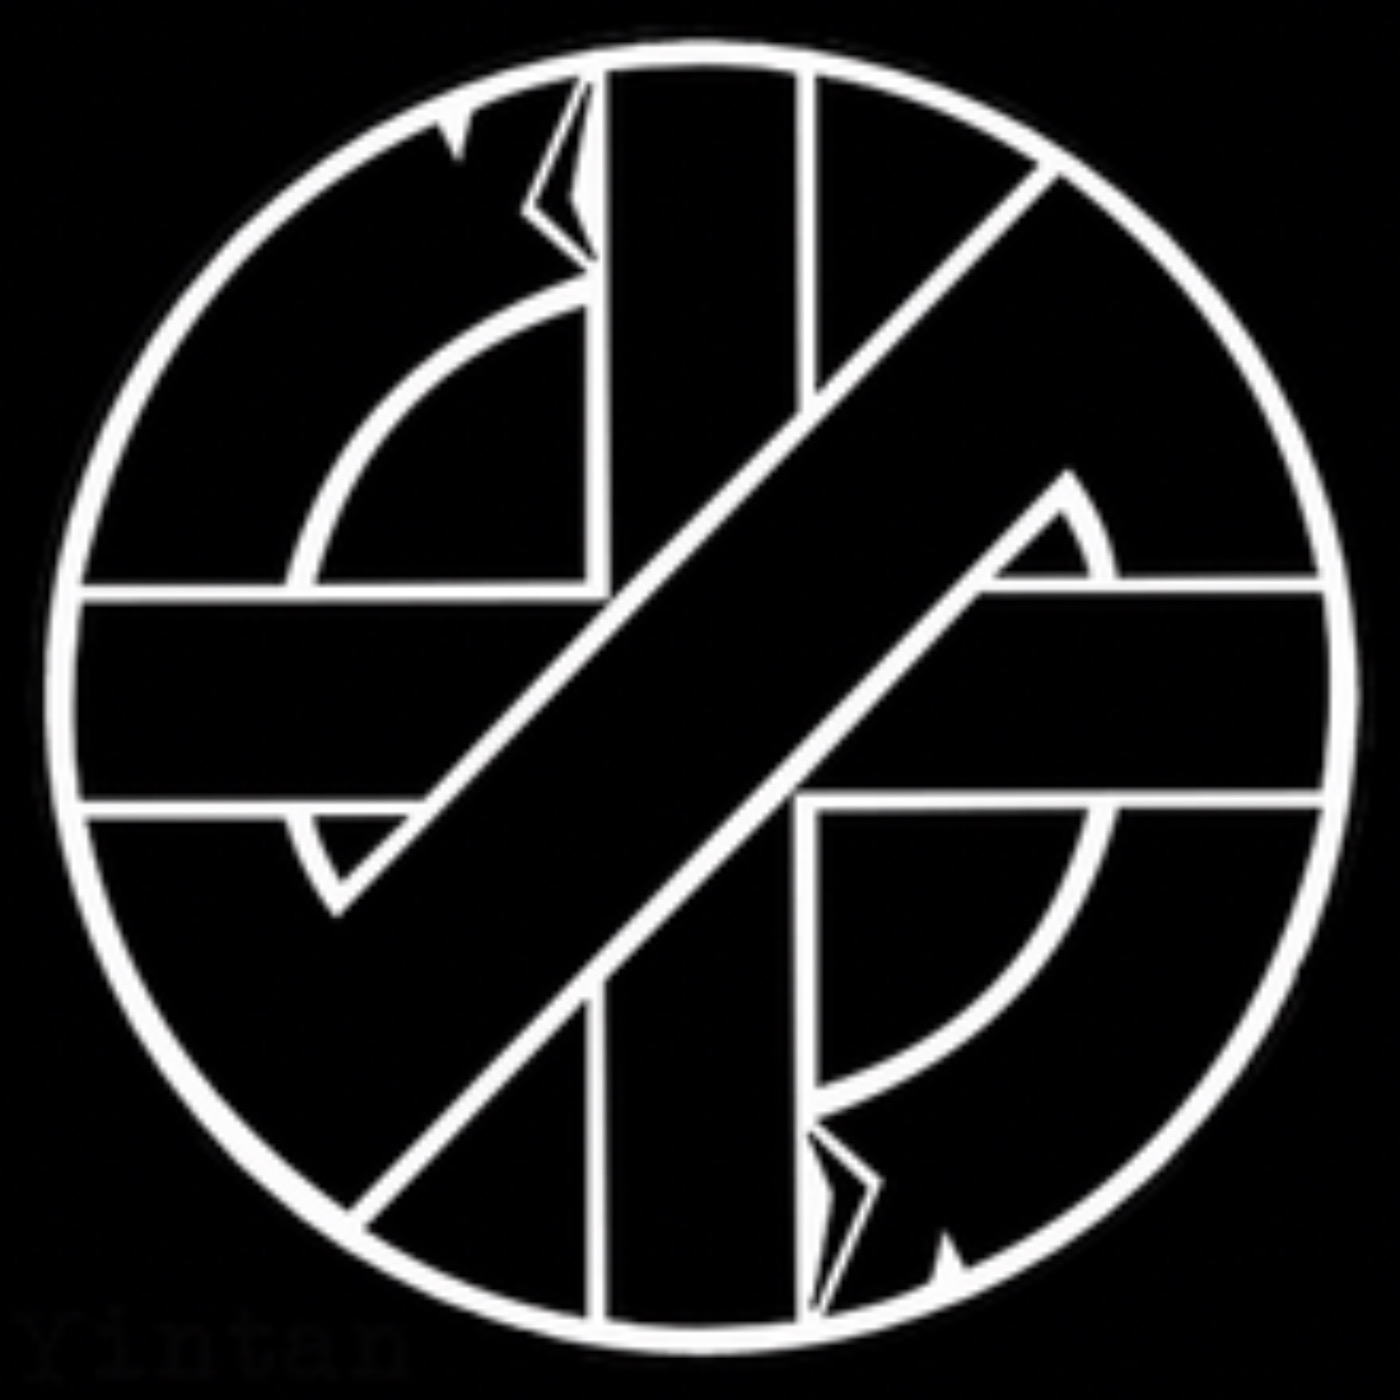 cover art for Crass their influences on Extreme Metal and the ground breaking third album